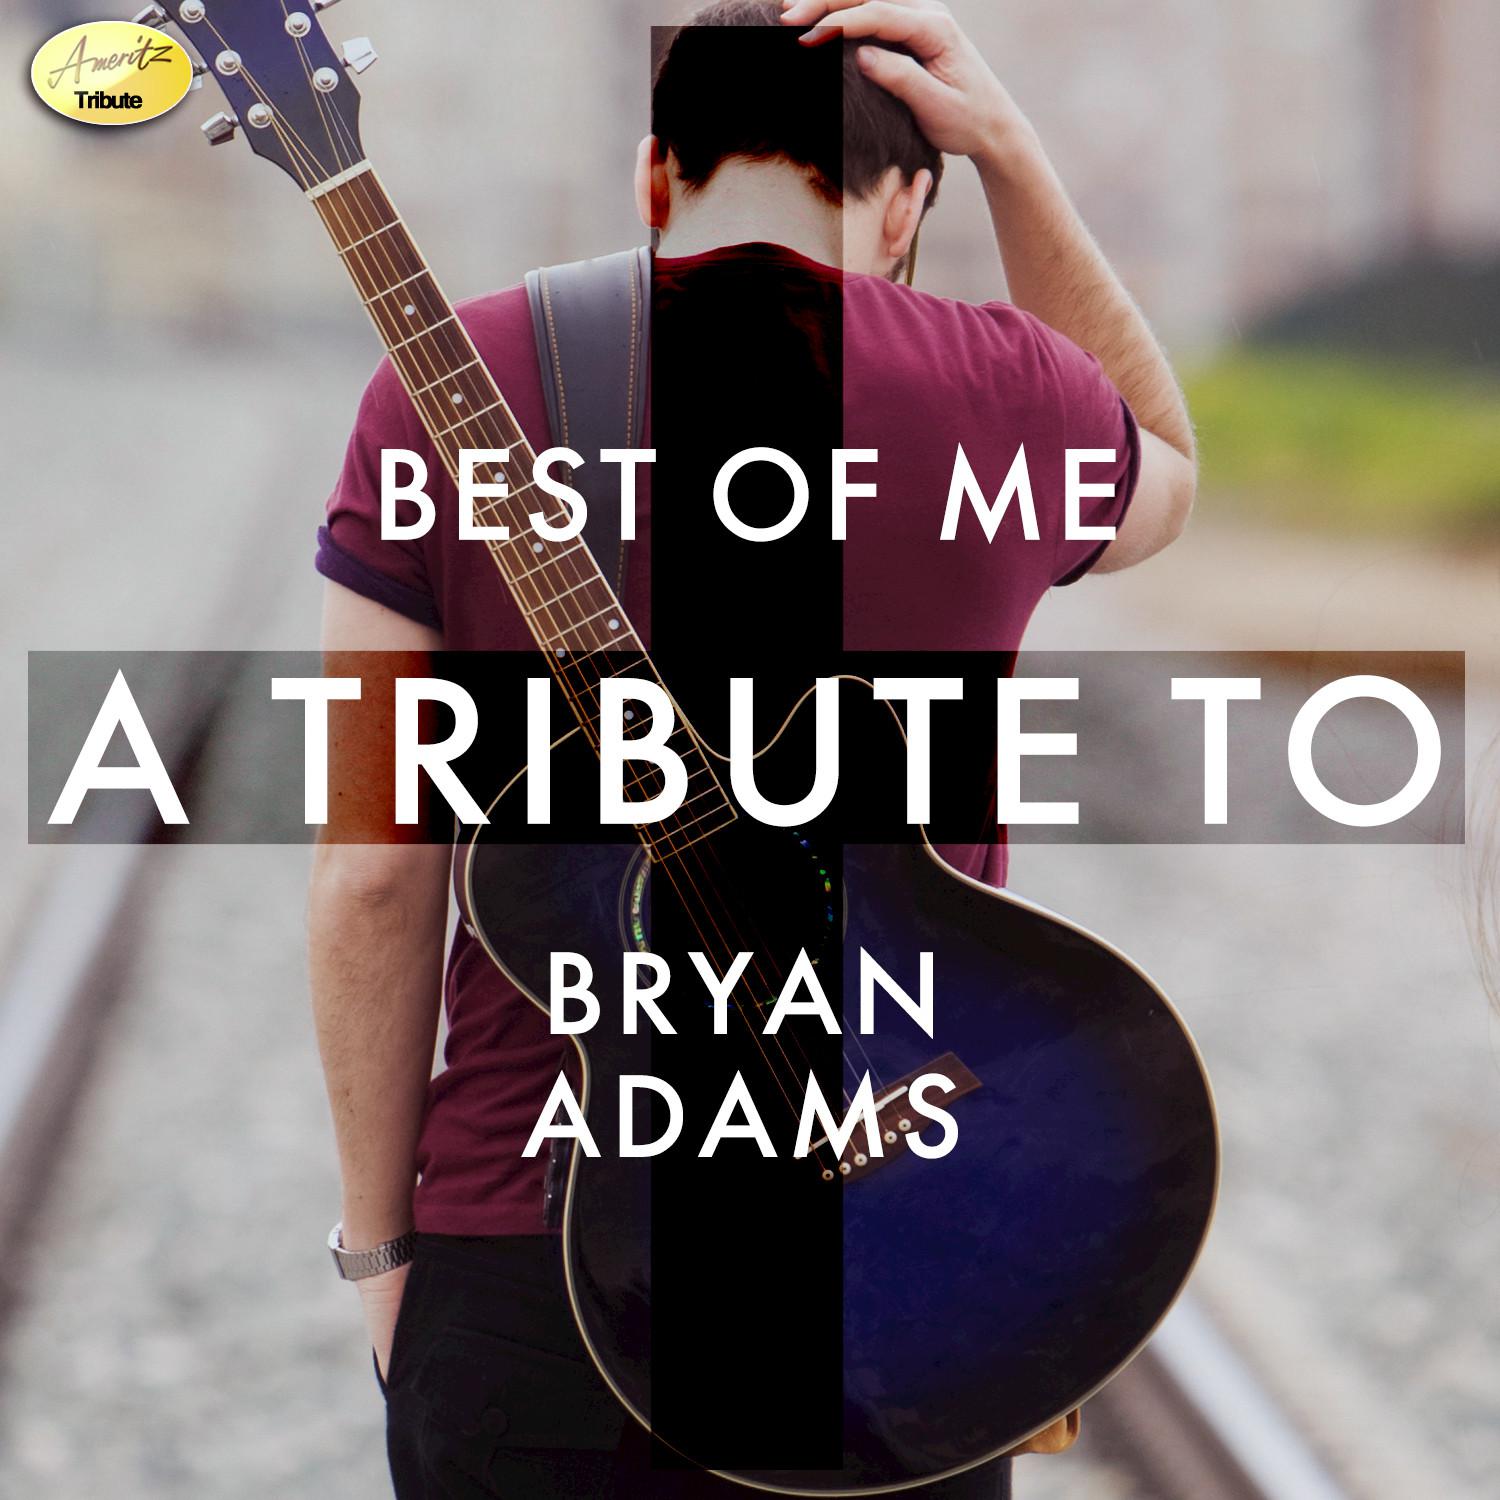 Best of Me - A Tribute to Bryan Adams